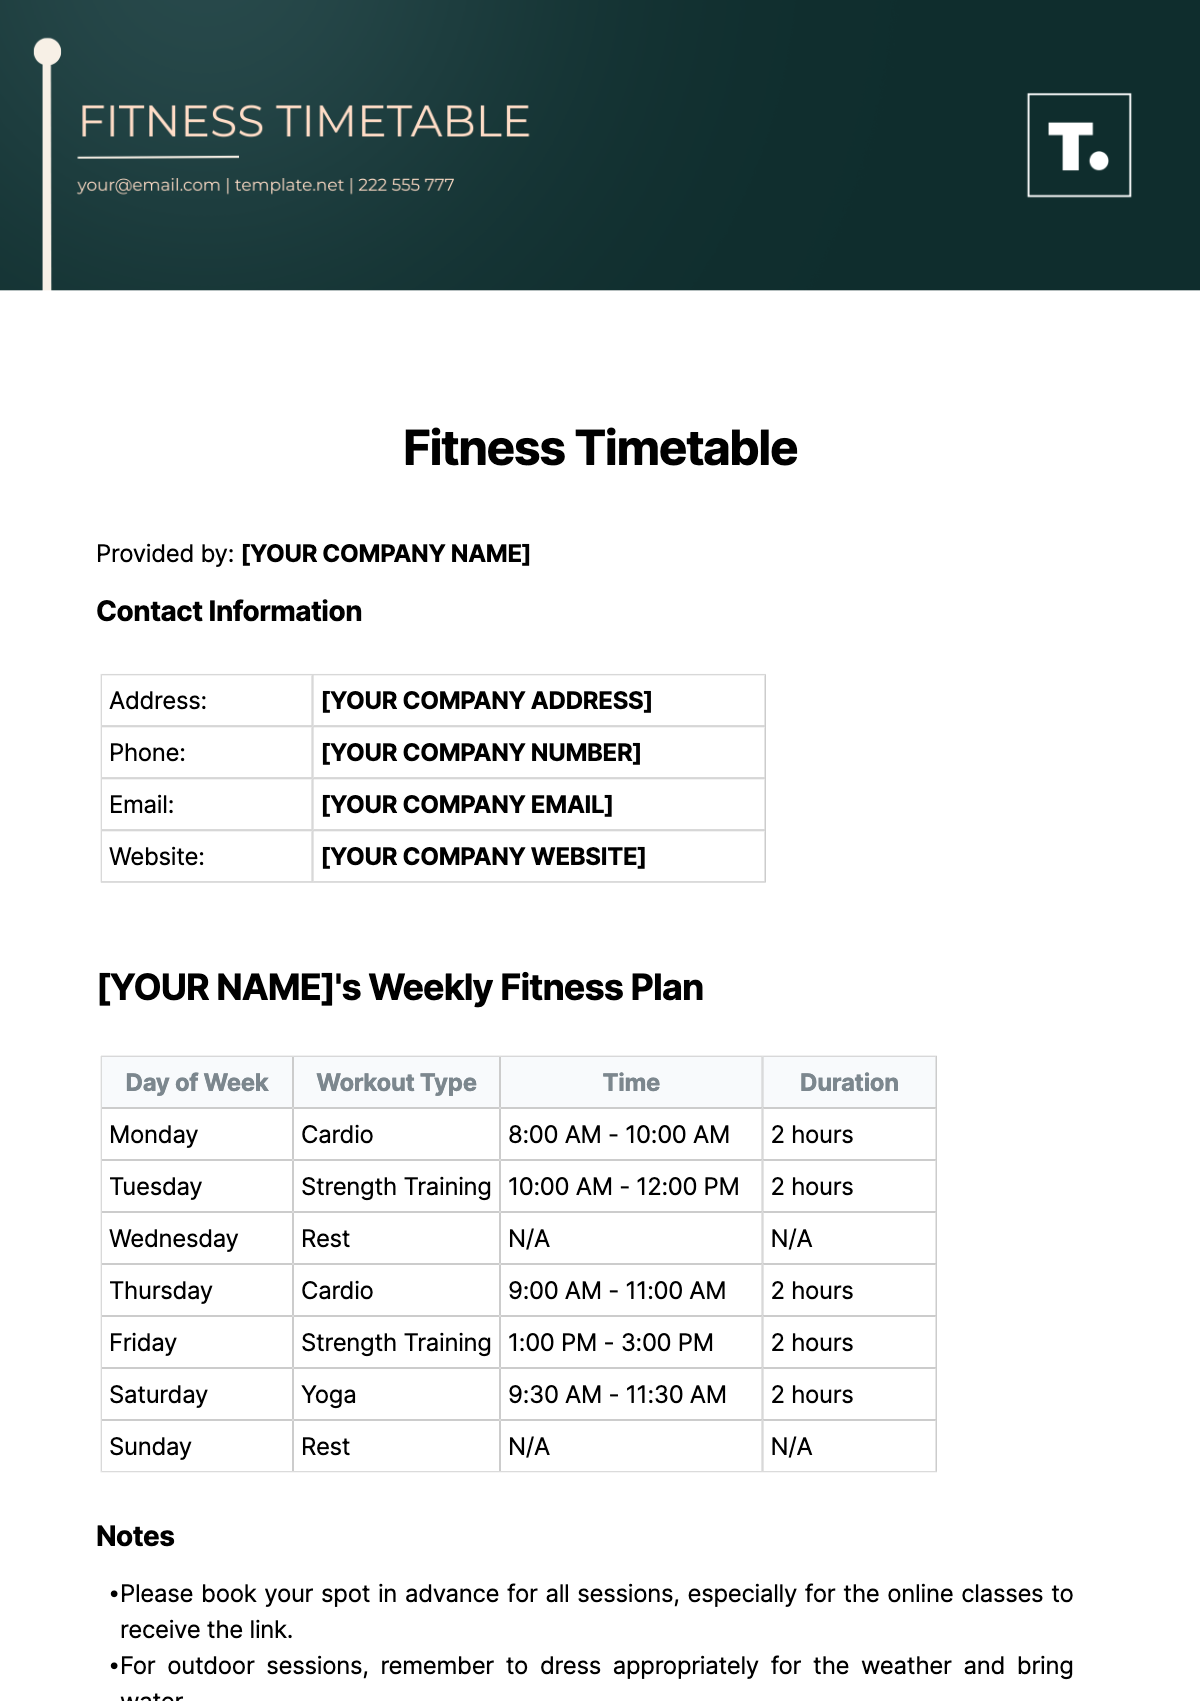 Fitness Timetable Template